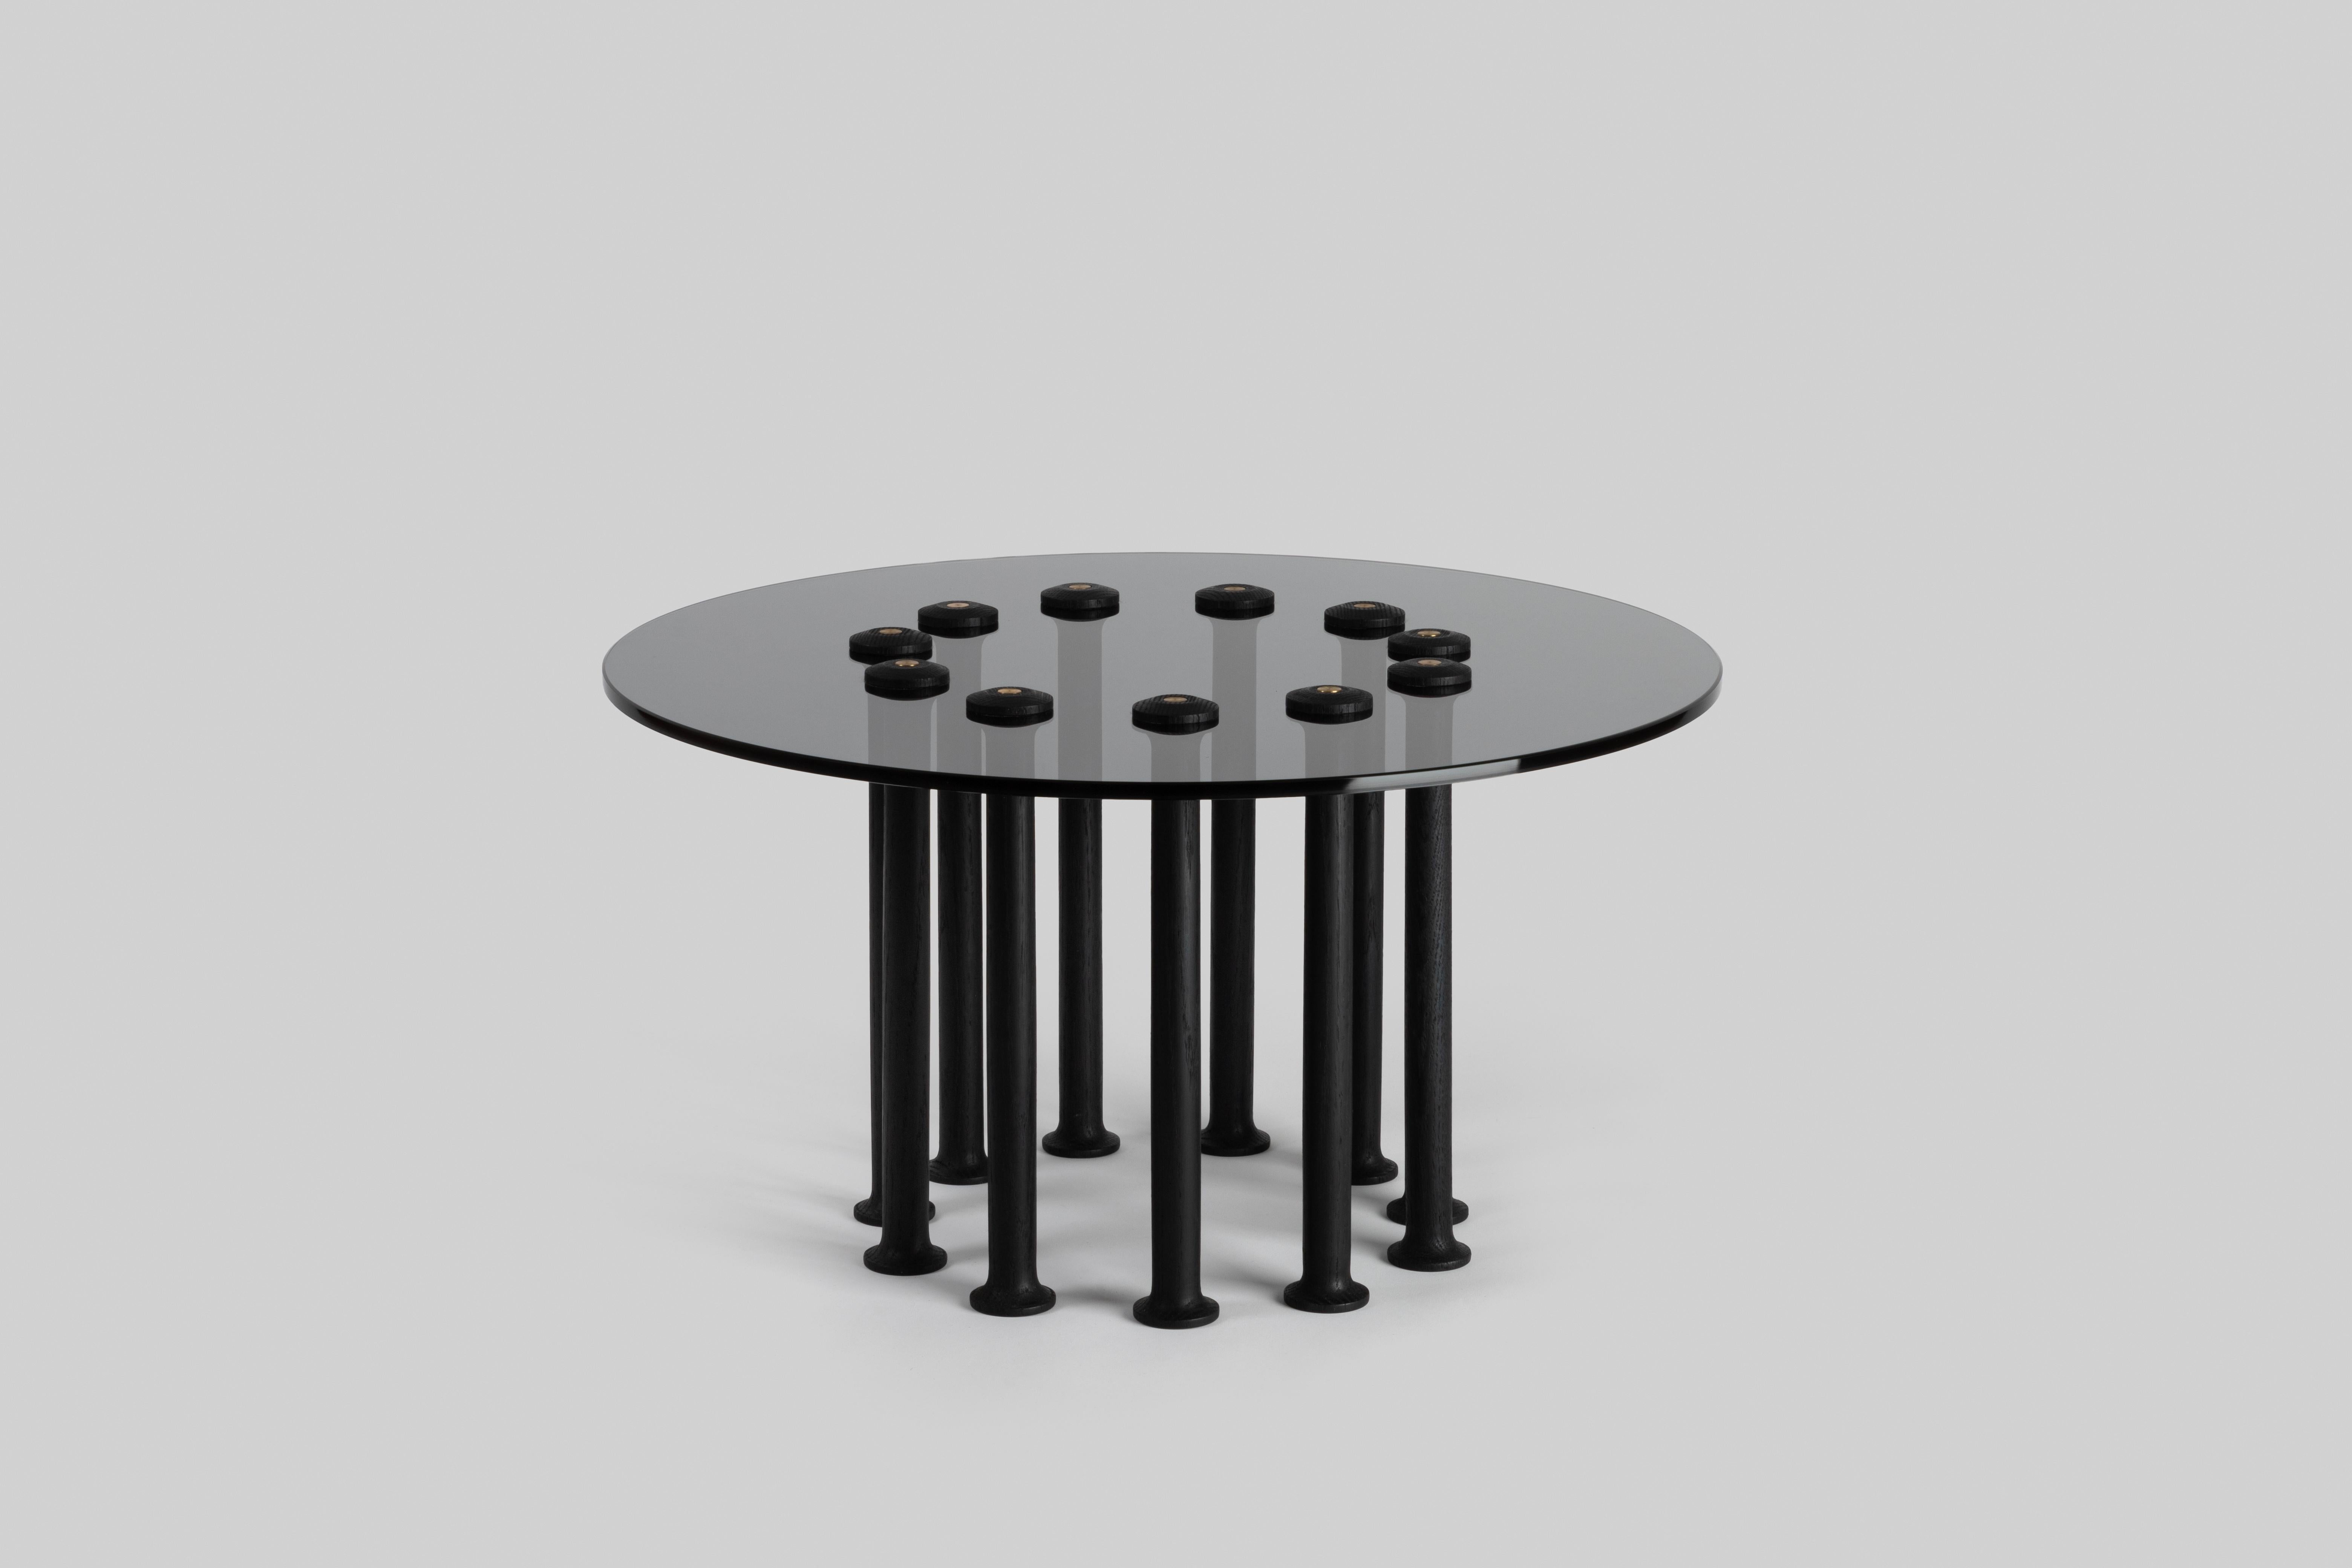 Molinillo is a collection of auxiliary and center tables designed by Colección Estudio. Each of the legs of the tables were made manually and its intense black color was achieved by carbonizing the wood, a finish inspired by mills. The covers, on